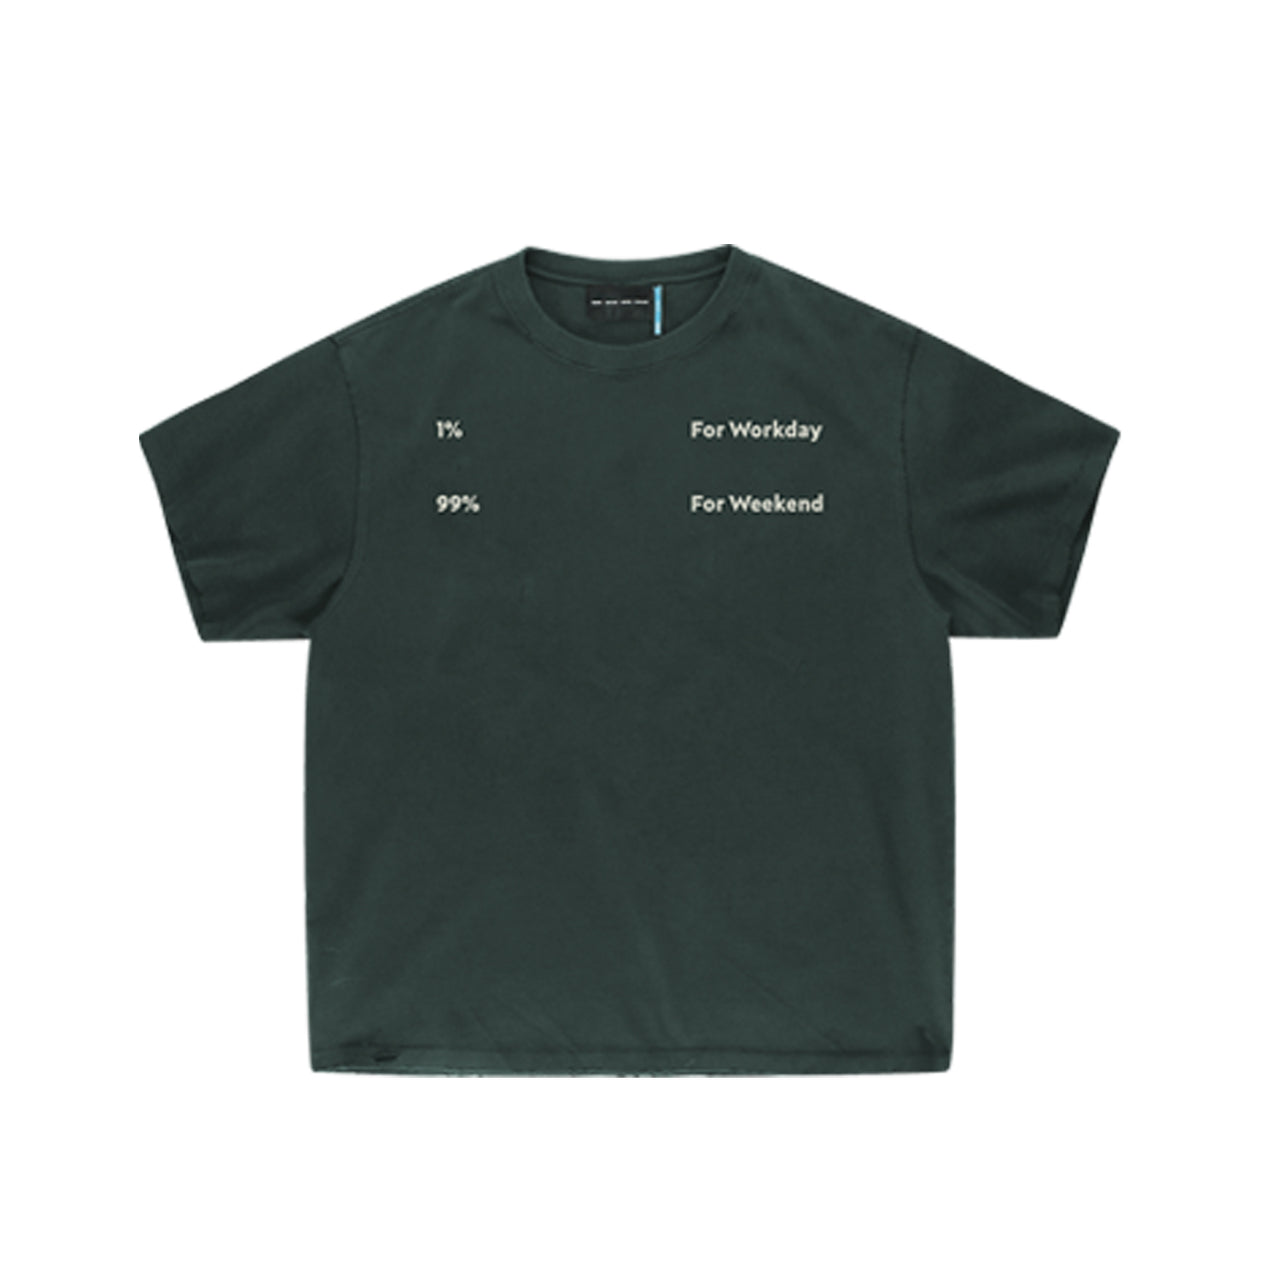 "1% For Workday, 99% For Weekend" Tee in Green